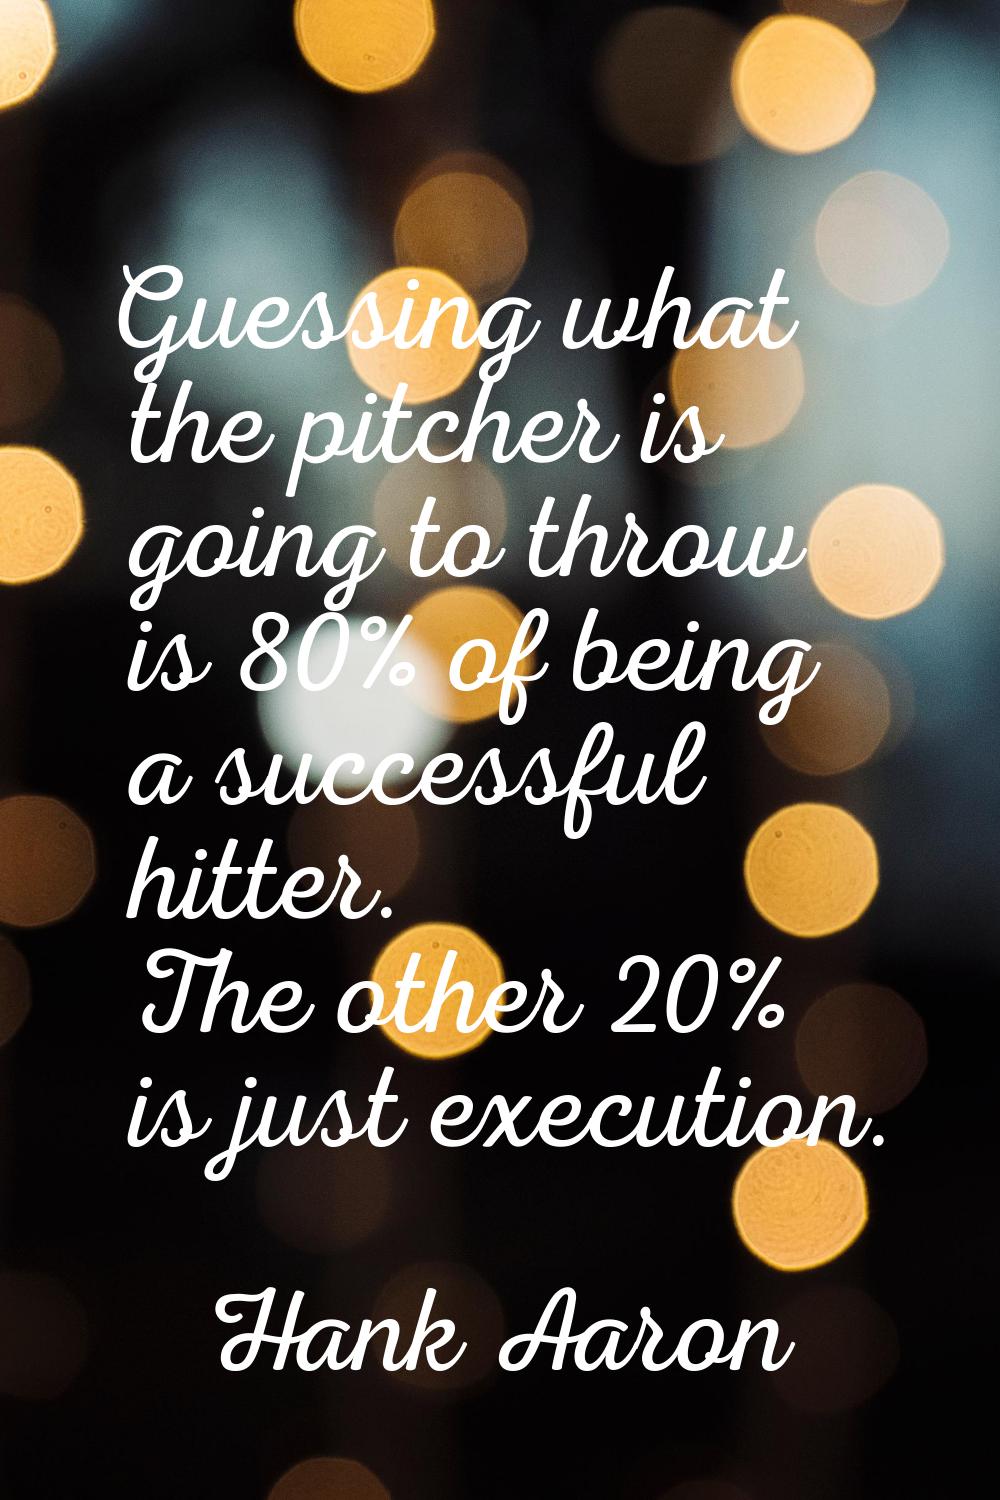 Guessing what the pitcher is going to throw is 80% of being a successful hitter. The other 20% is j